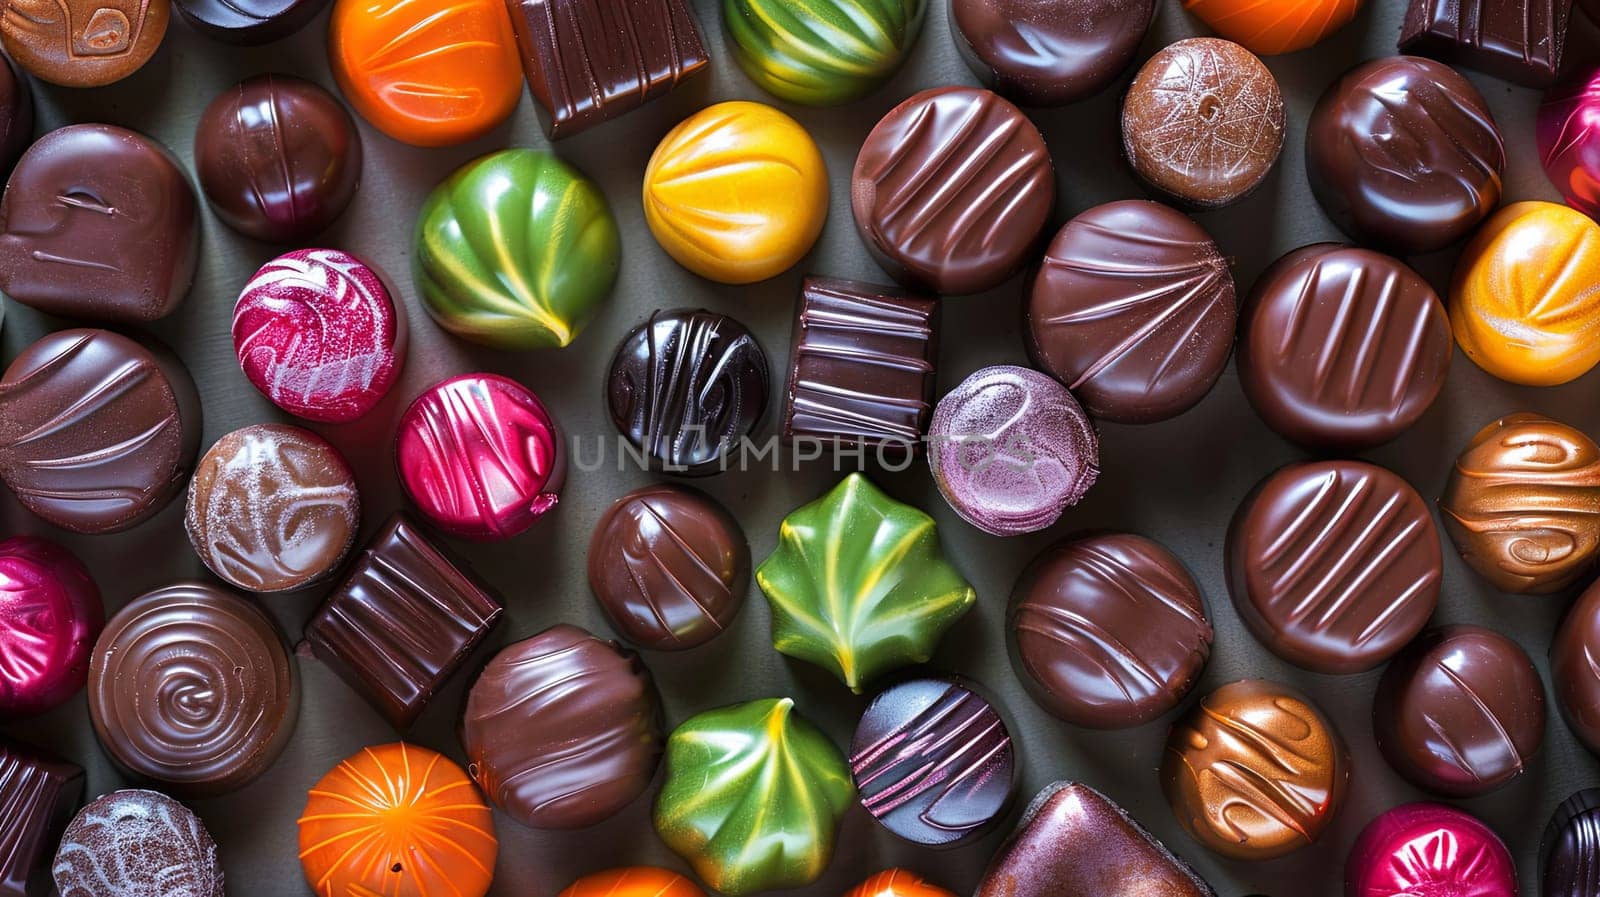 Many different types of colorful chocolates with shiny wrappers spread out, showcasing a variety of flavors and textures.